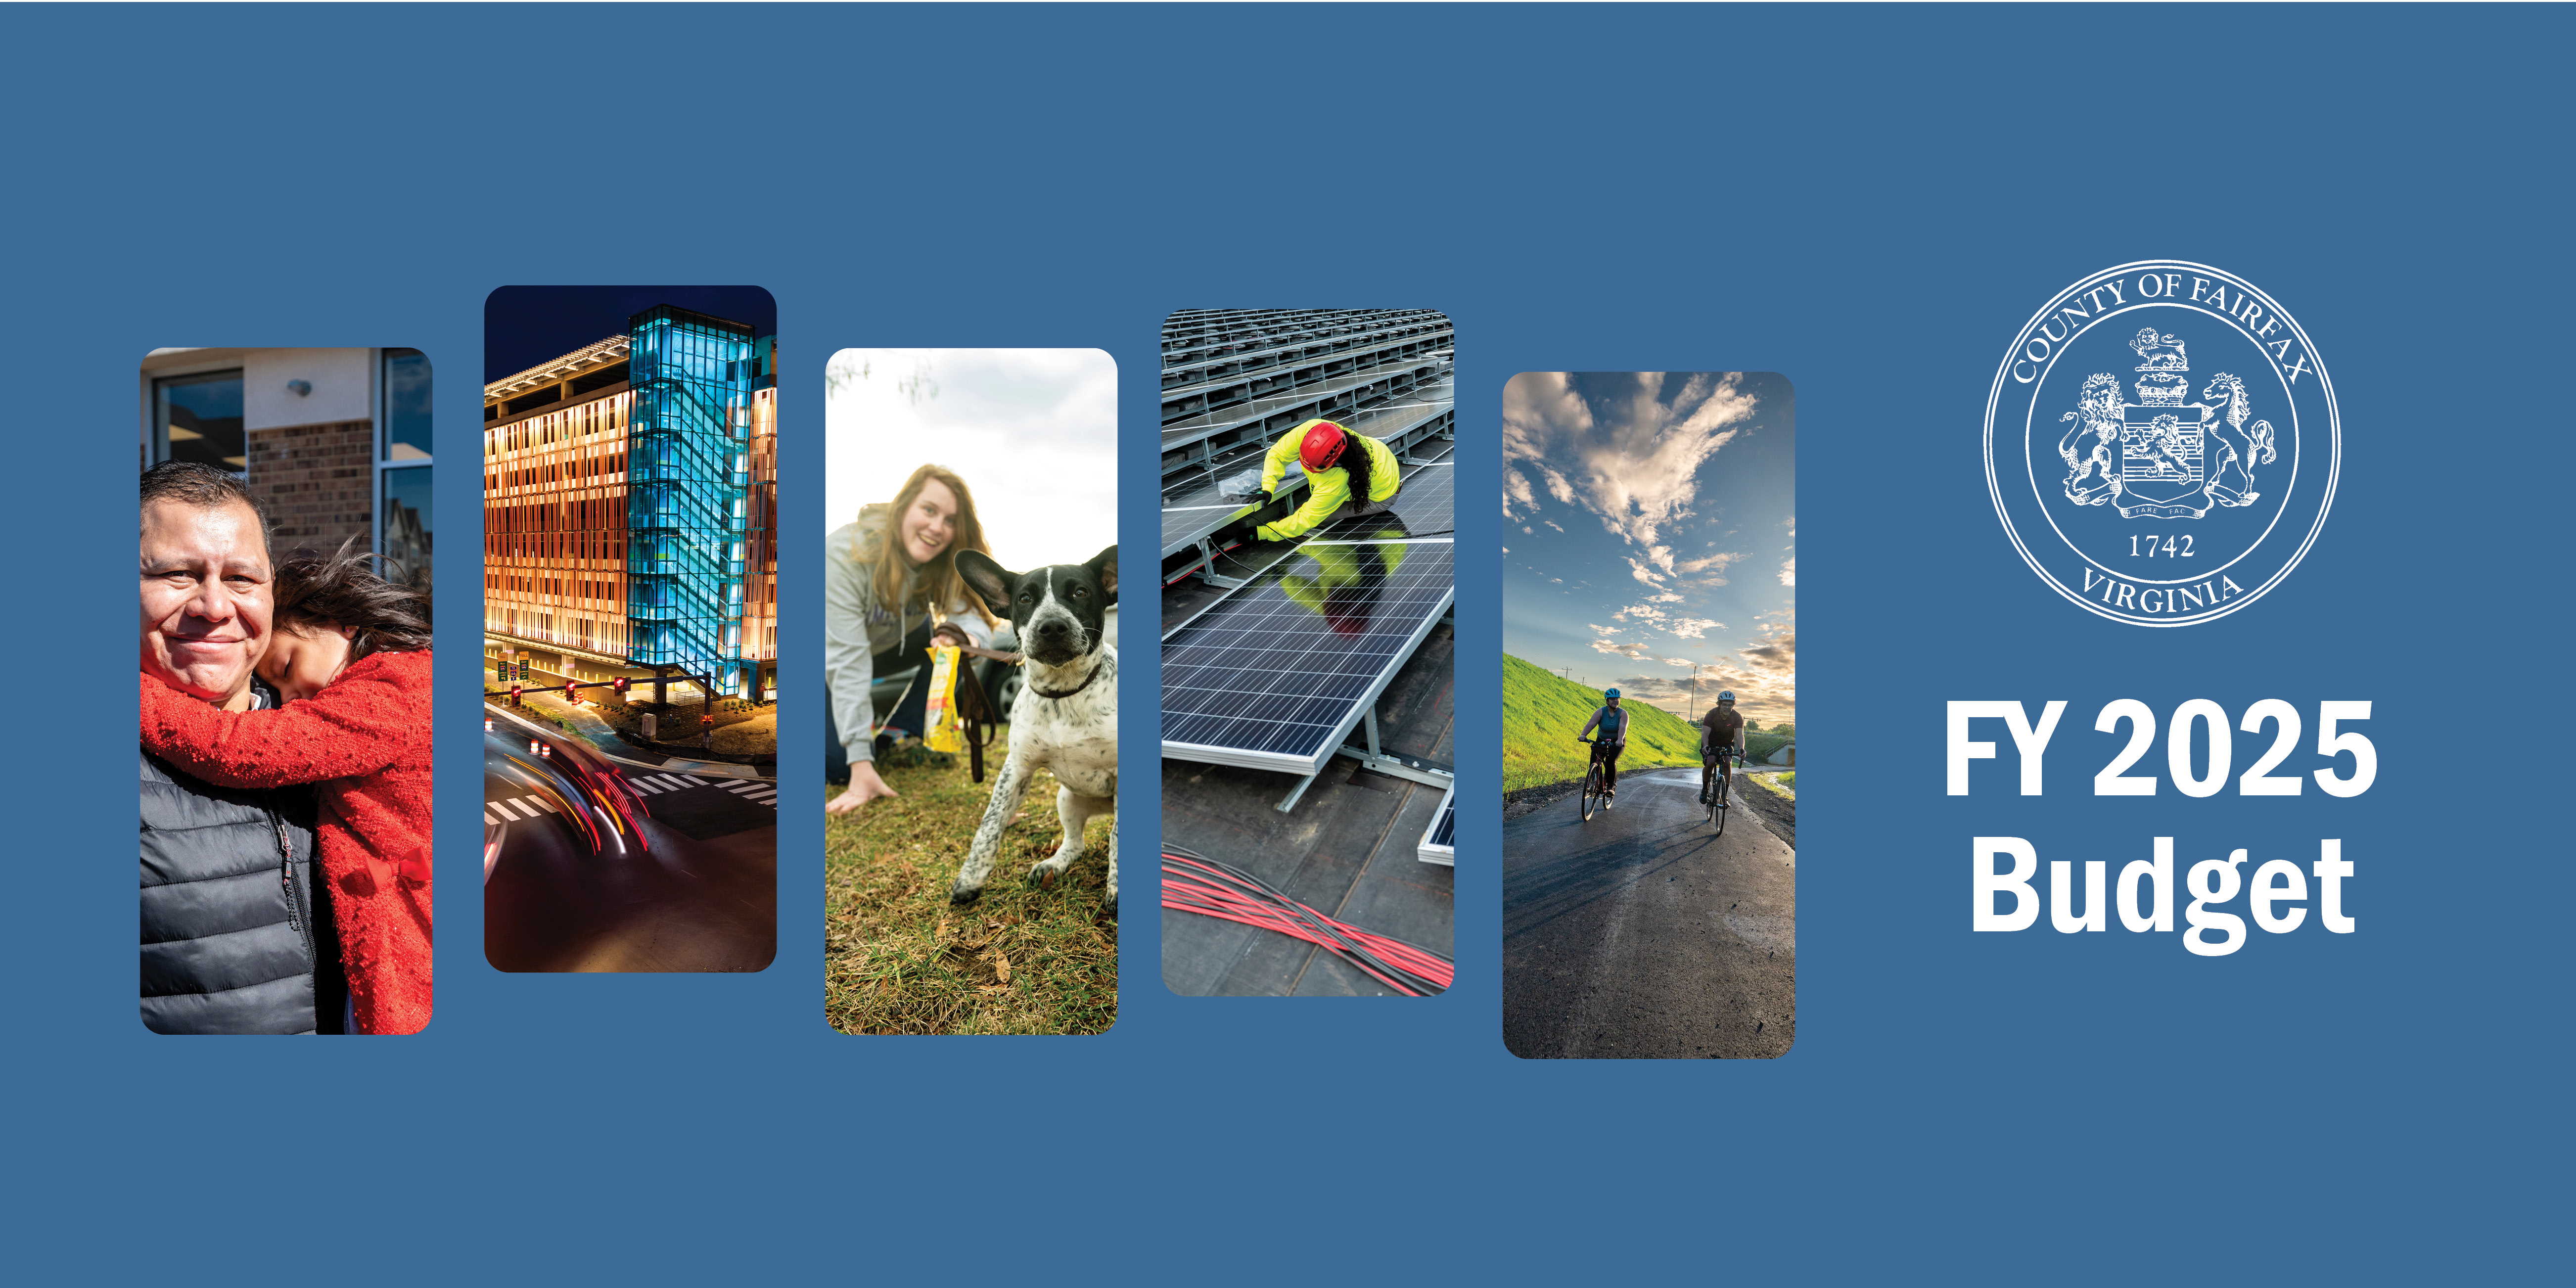 Images of man and child, buildings, woman and dog, solar panels and worker, cyclists